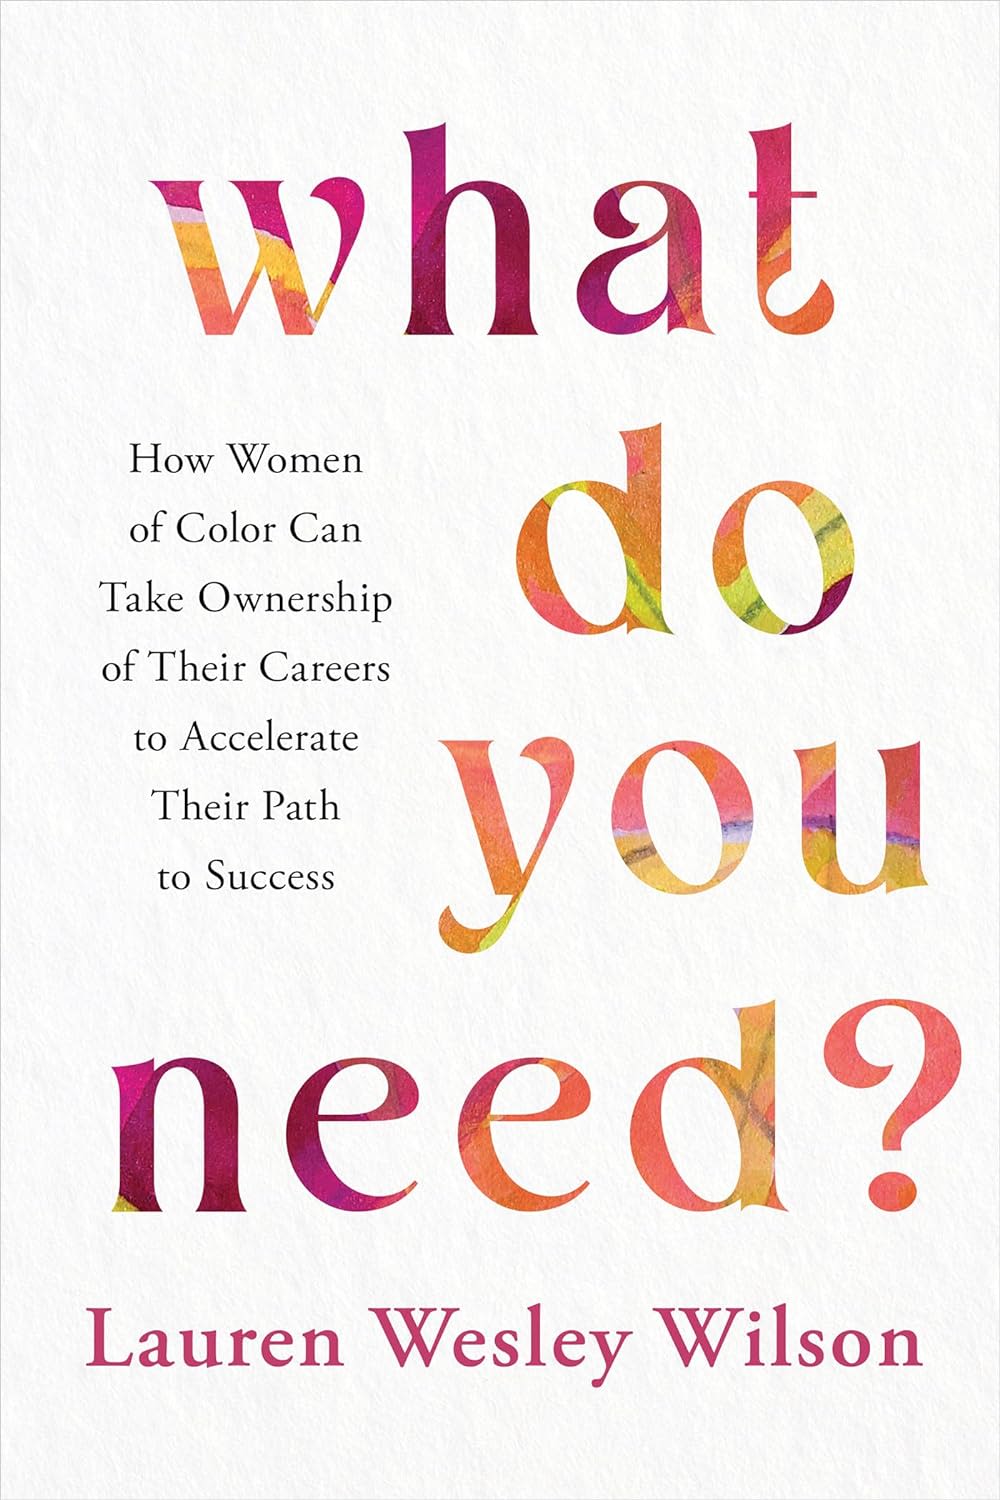 Lauren Wesley Wilson’s ‘What Do You Need?’ helps Black women ask for what they deserve at work